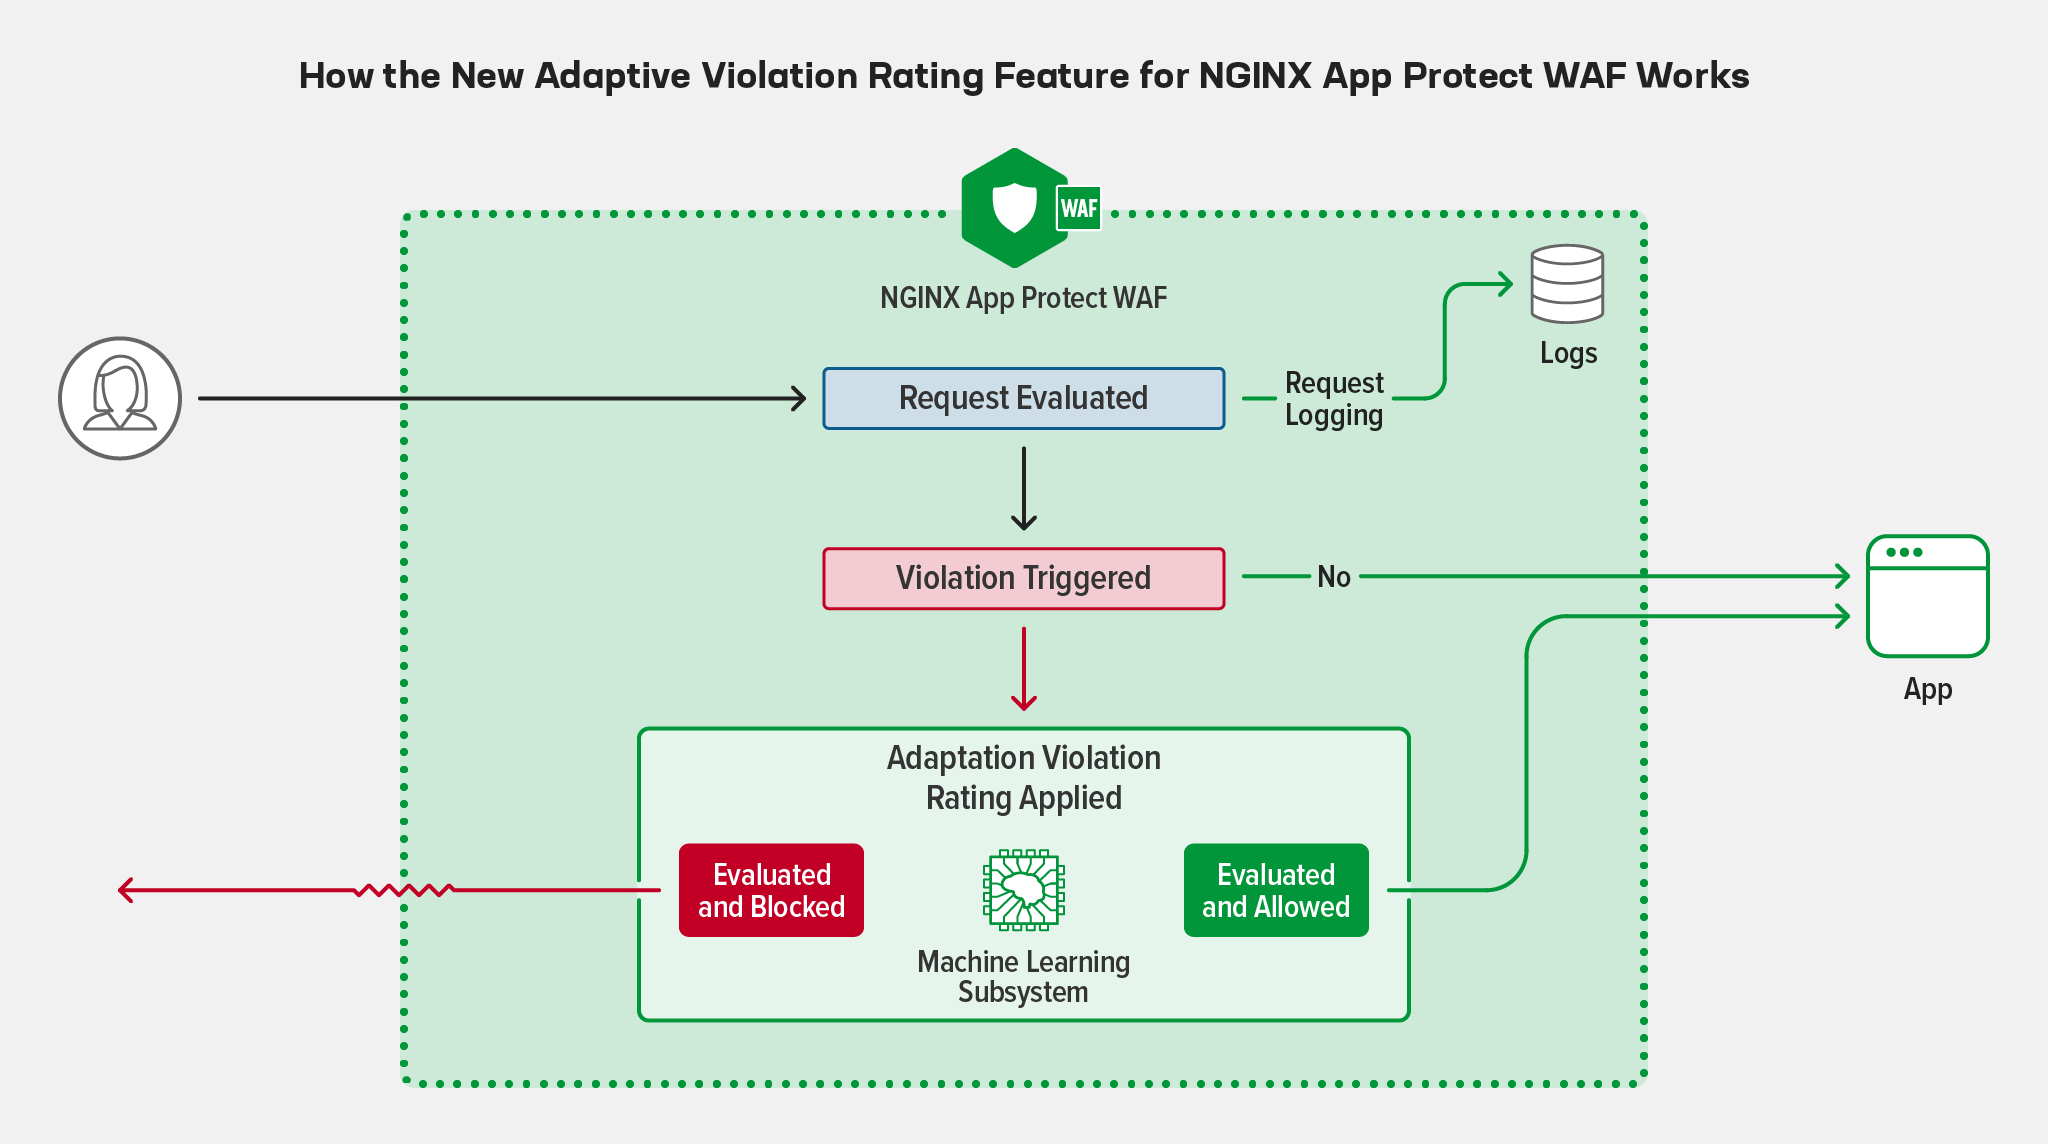 Diagram showing how NGINX App Protect WAF Adaptive Violation Rating feature works